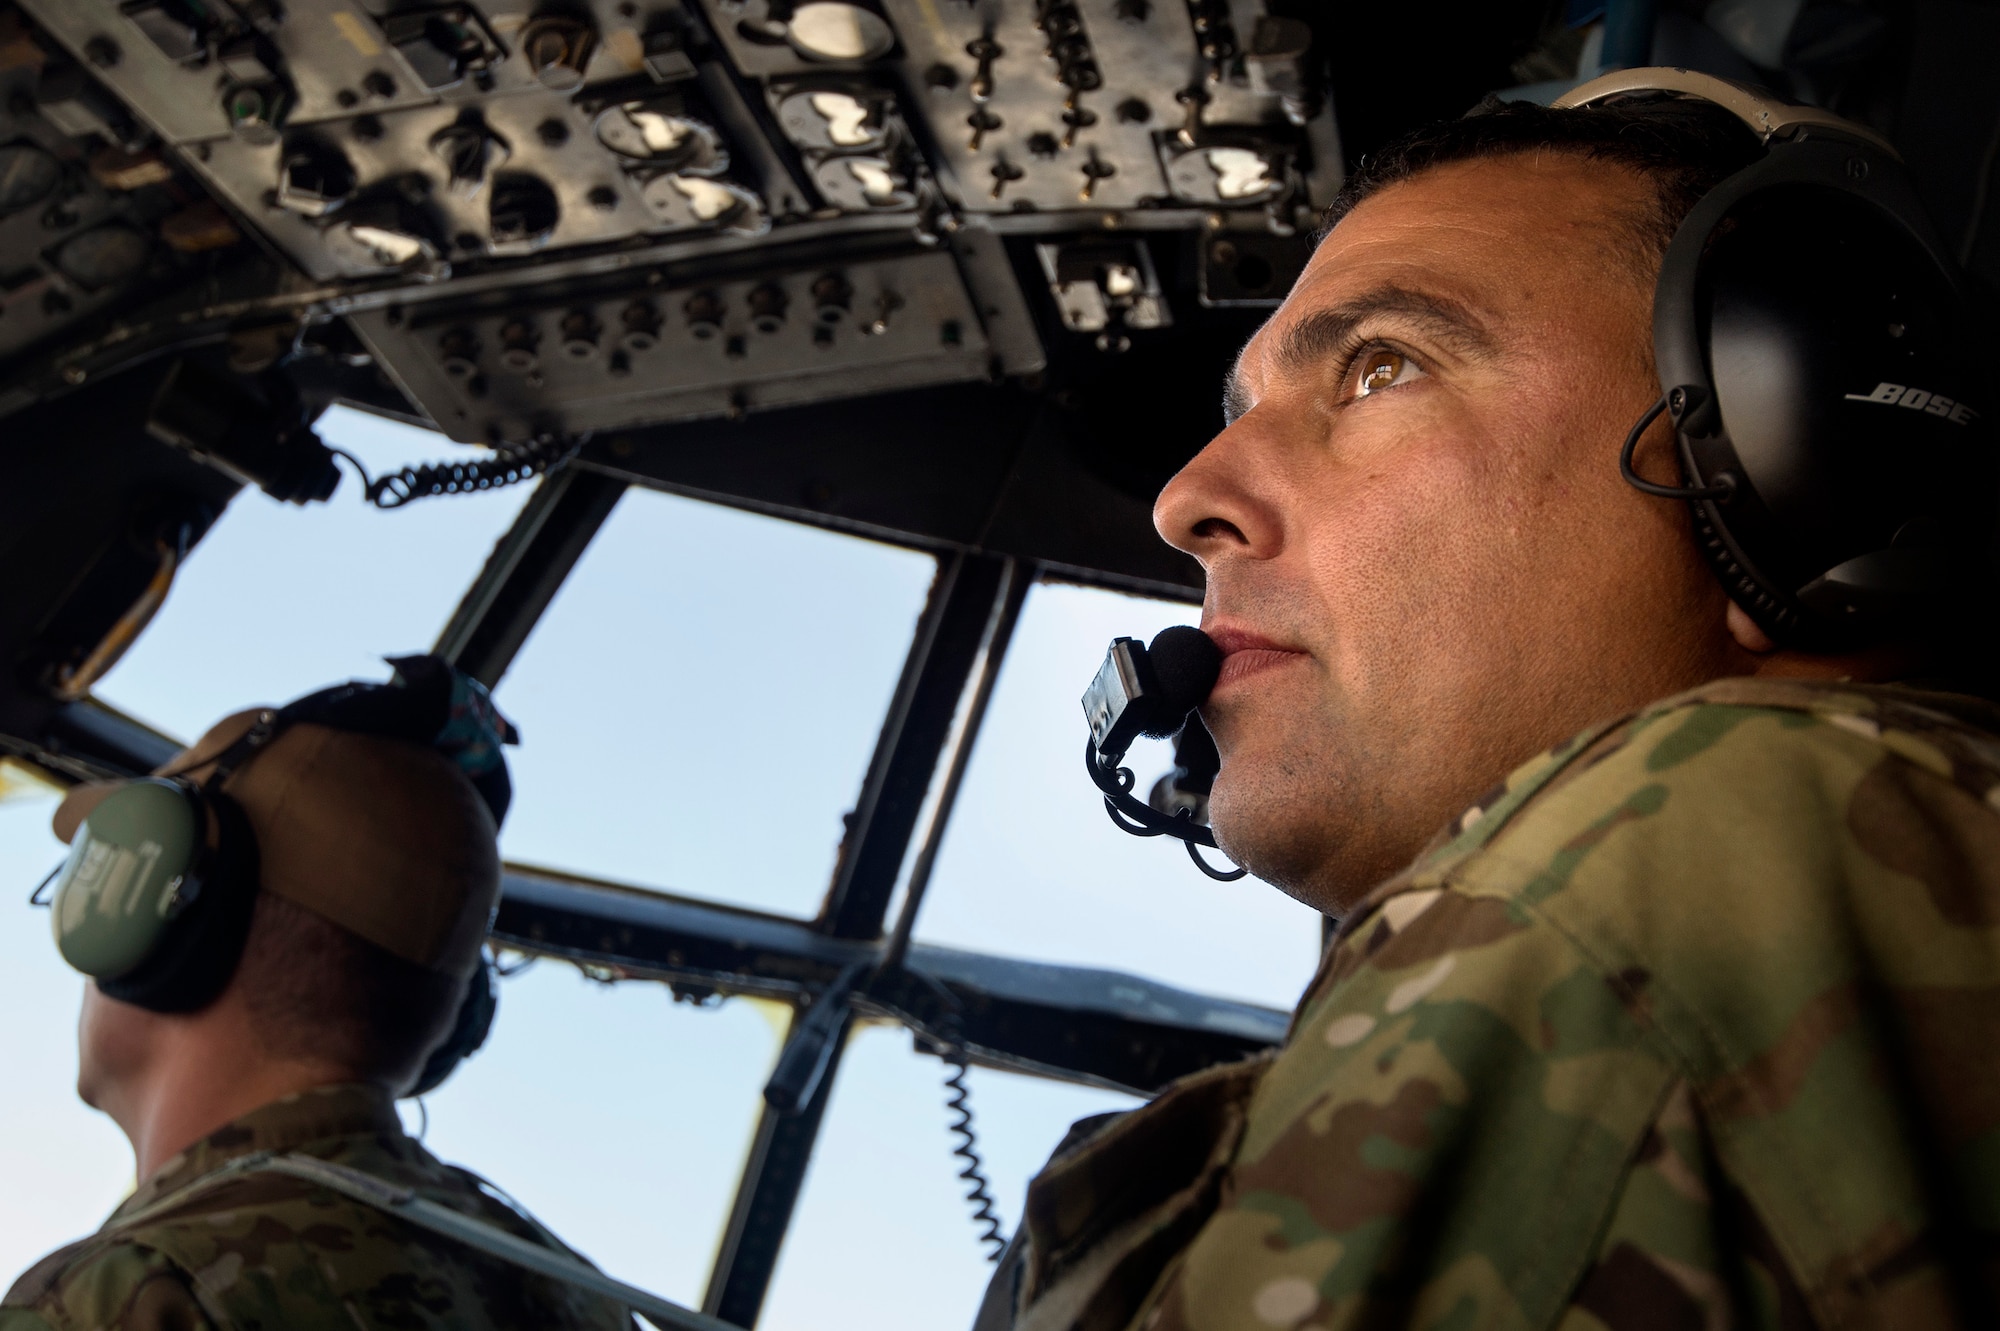 Staff Sgt. David Billings, 774th Expeditionary Airlift Squadron flight engineer, monitors instrument data on a C-130 Hercules cargo plane in route to Forward Operating Base Sharana, Paktika province, Afghanistan, Sept. 28, 2013. This mission marked a retrograde milestone as the 774th EAS transported the last cargo from FOB Sharana before the base is transferred to the Afghan Ministry of Defense. Billings, a Cabot, Ark., native, is deployed from the Little Rock, Arkansas Air National Guard. 